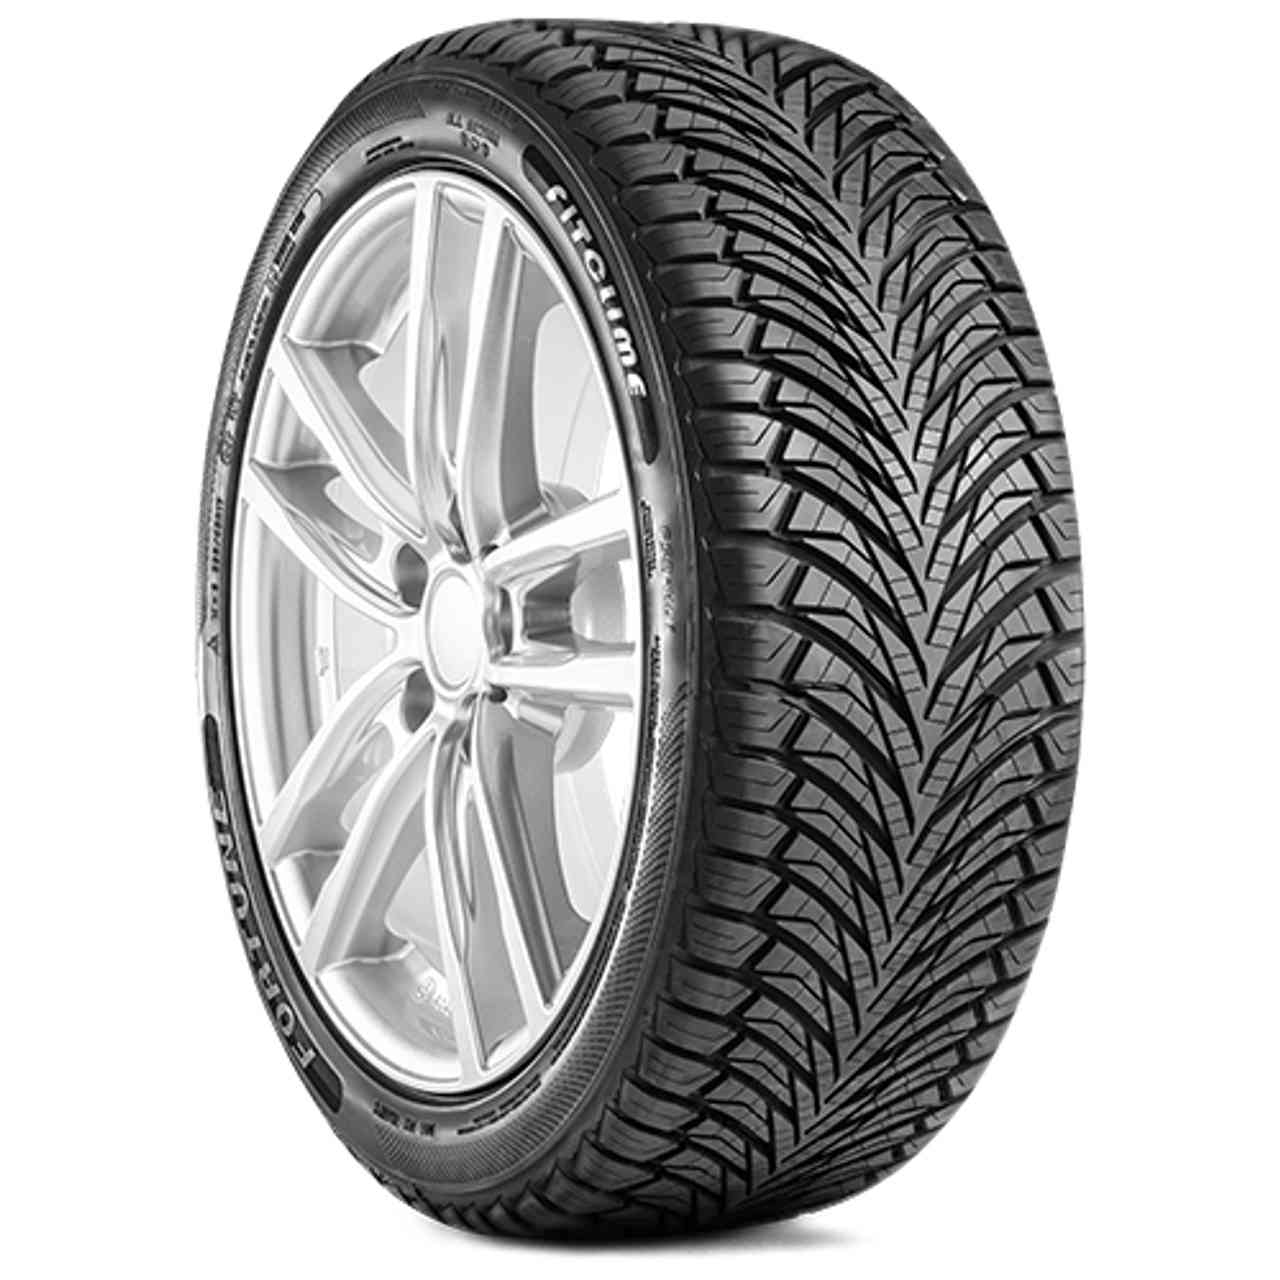 FORTUNE FITCLIME FSR-401 185/60R15 88H BSW XL